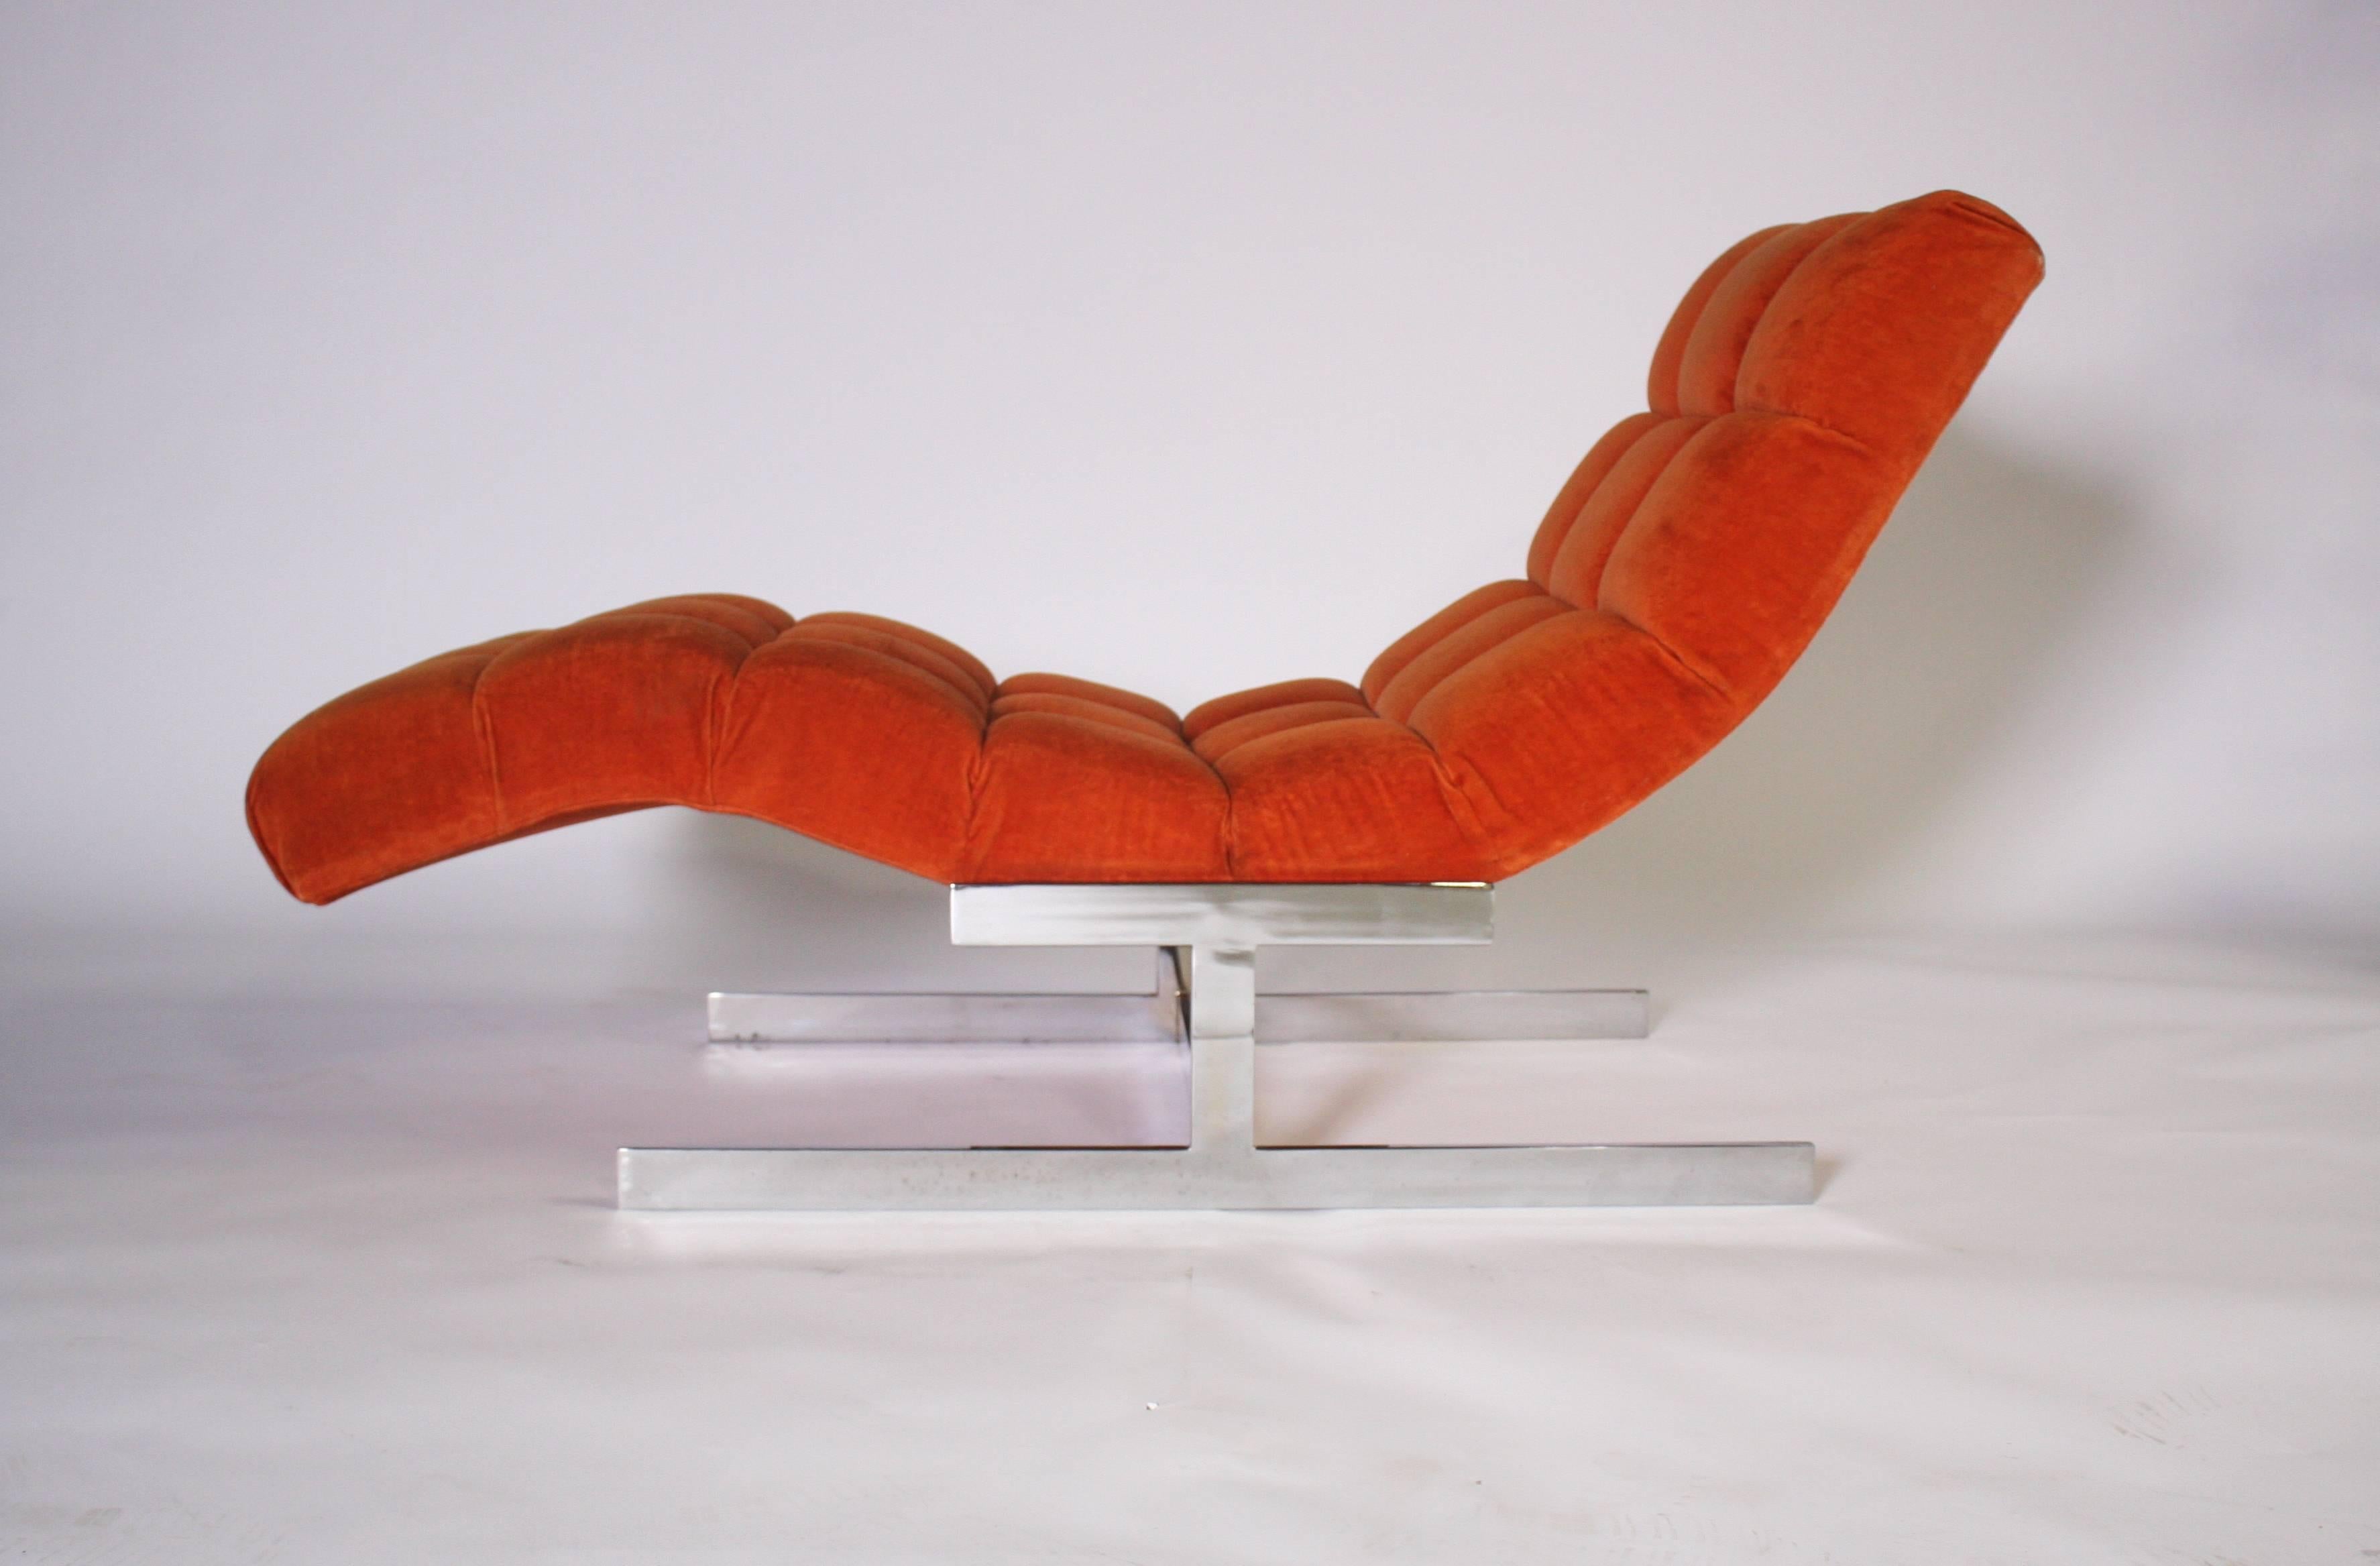 Iconic 1970s wave chaise longue after Milo Baughman in original orange biscuit tufted upholstery on a chrome steel frame.